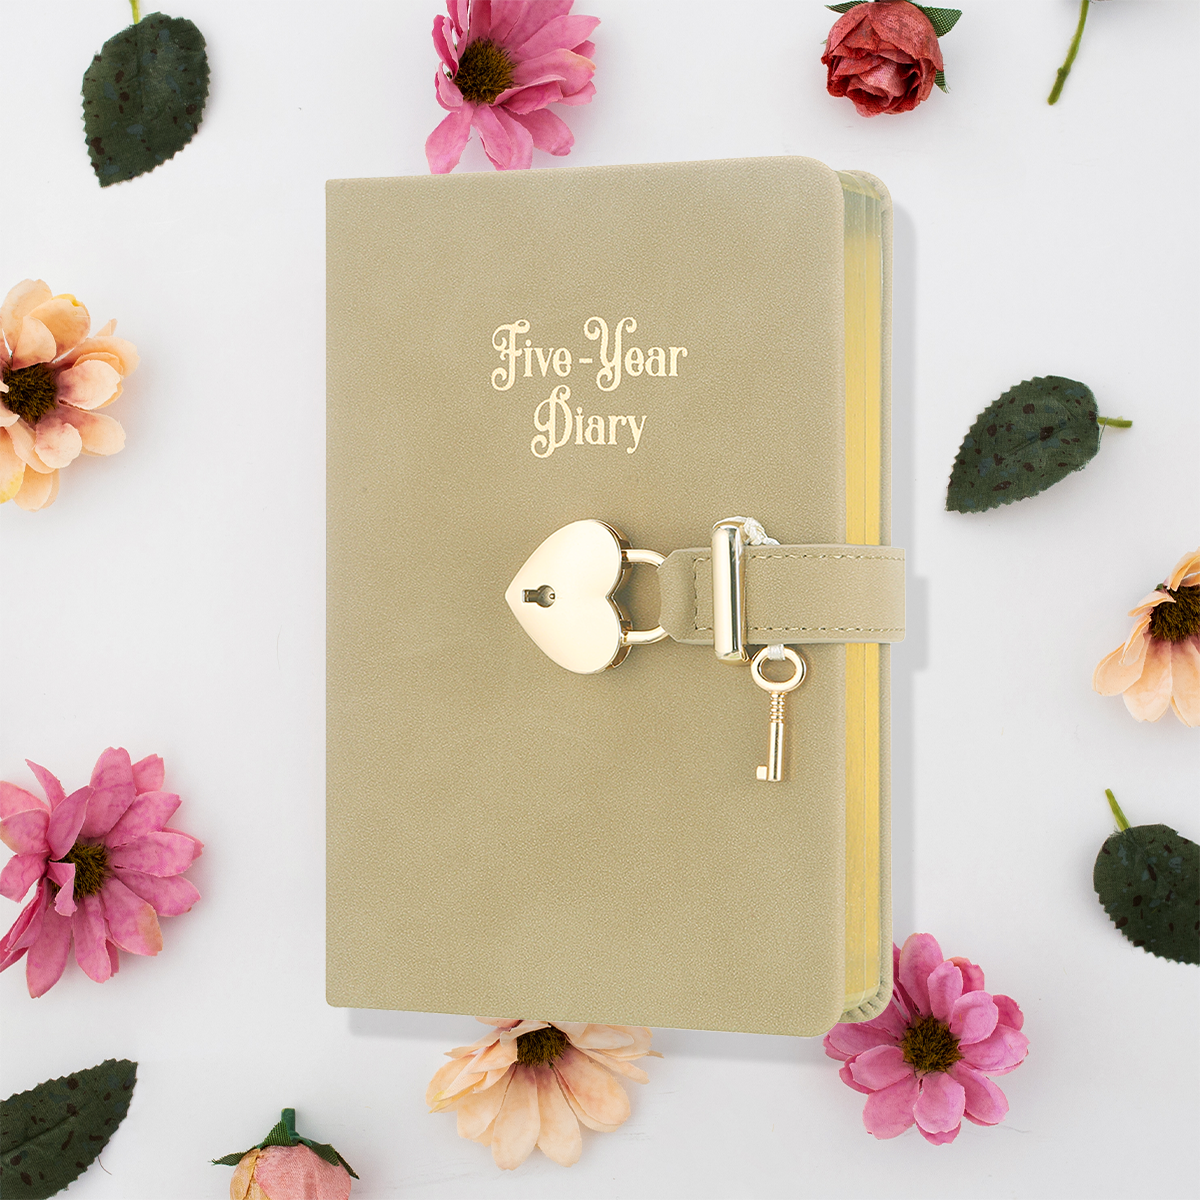 5 Year Diary for Women and Girls: Five-Year Happiness, Memory and Daily Journal with Heart Lock - 4.7x6.5", 394pages (Beige)